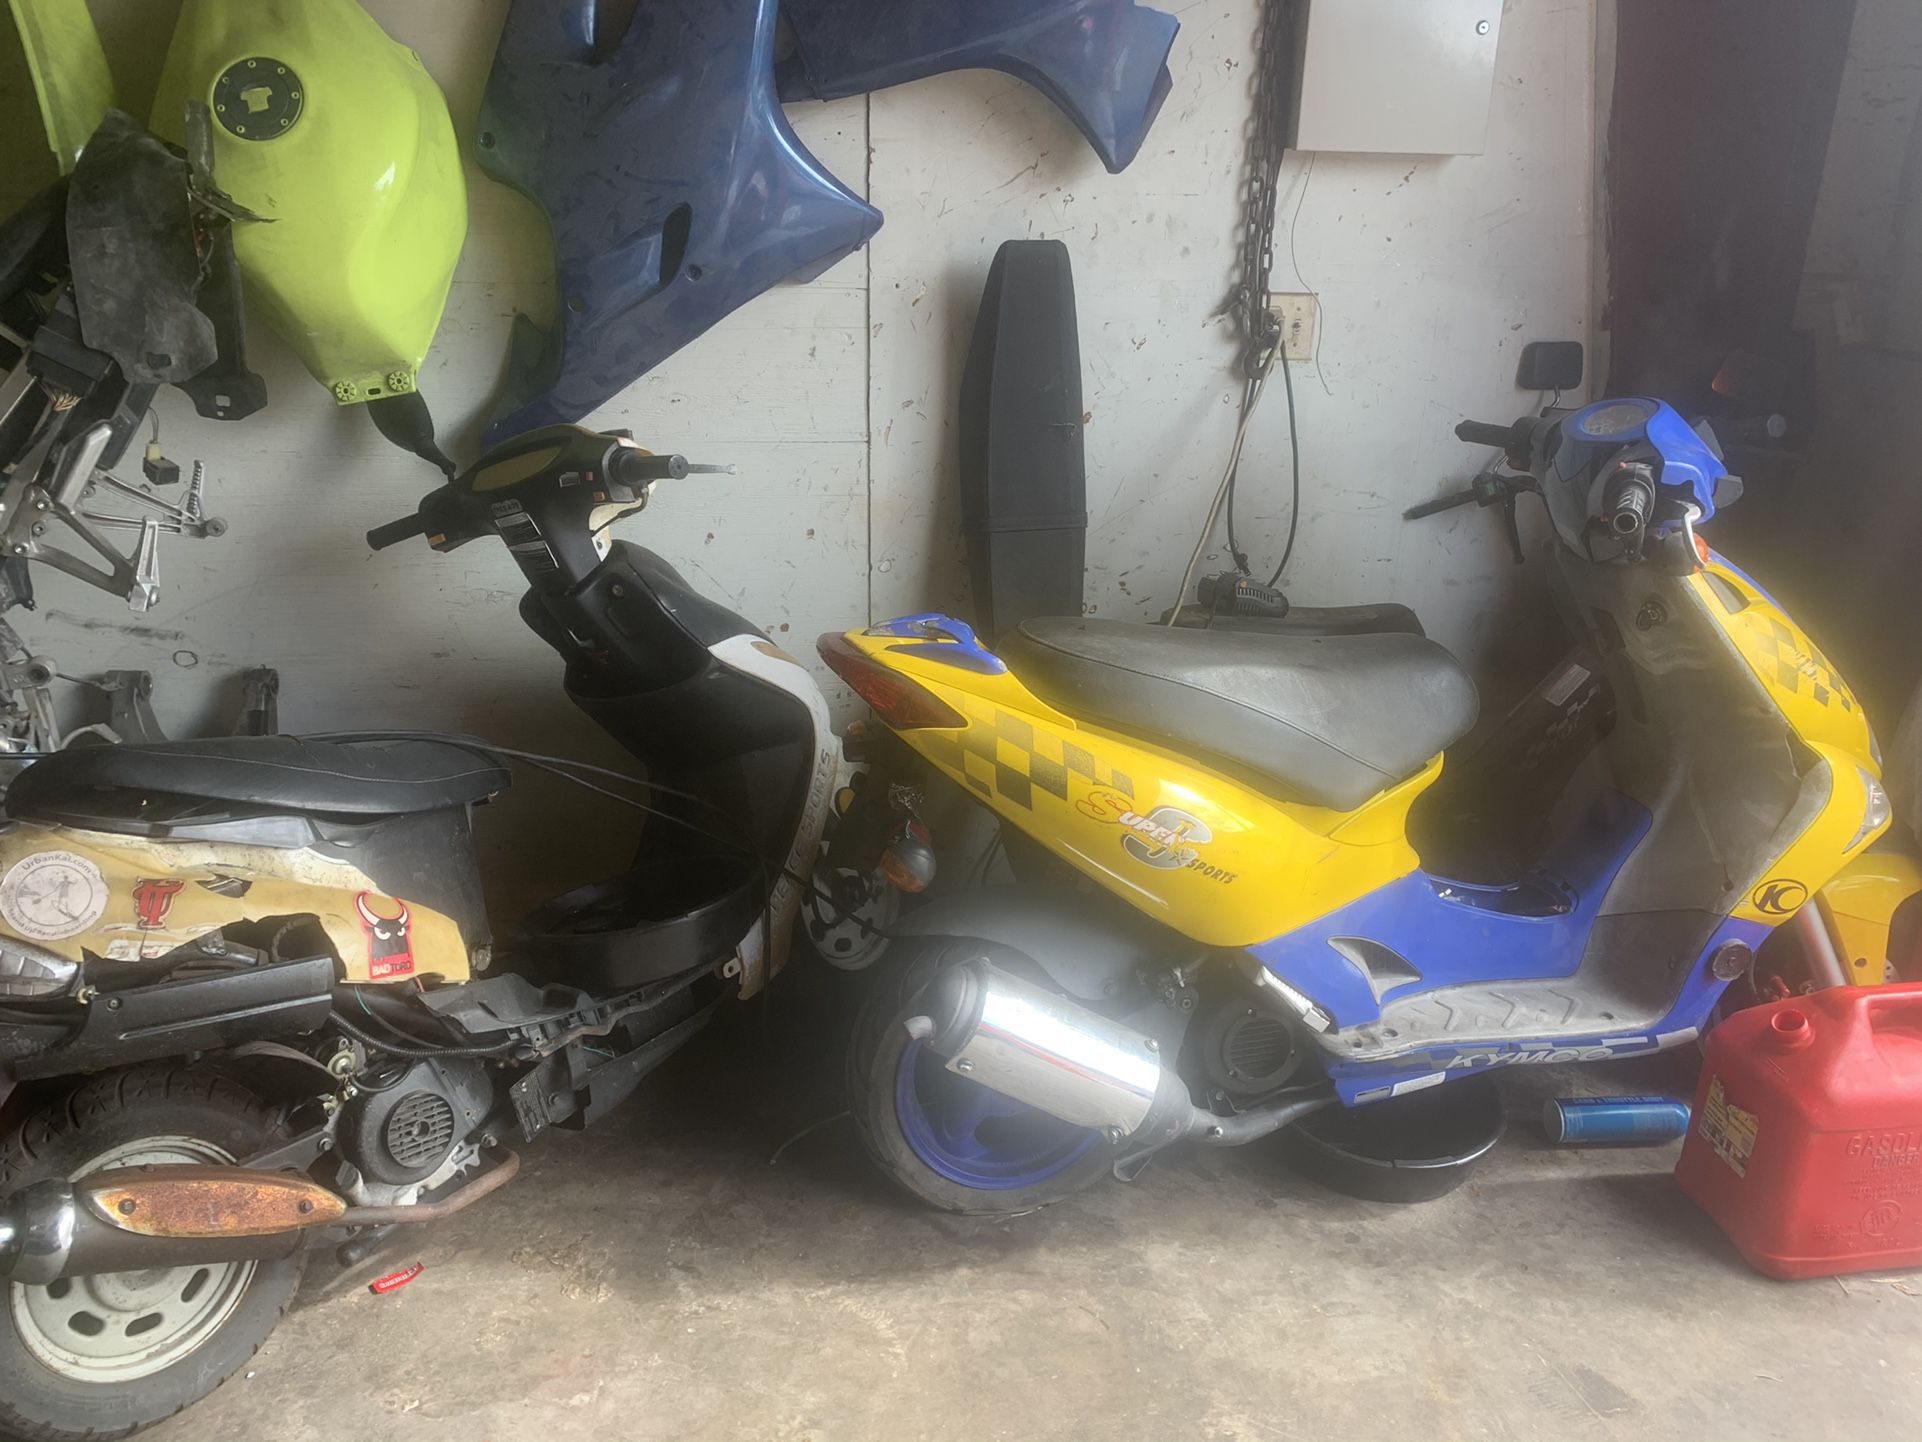 2 Scooters $650